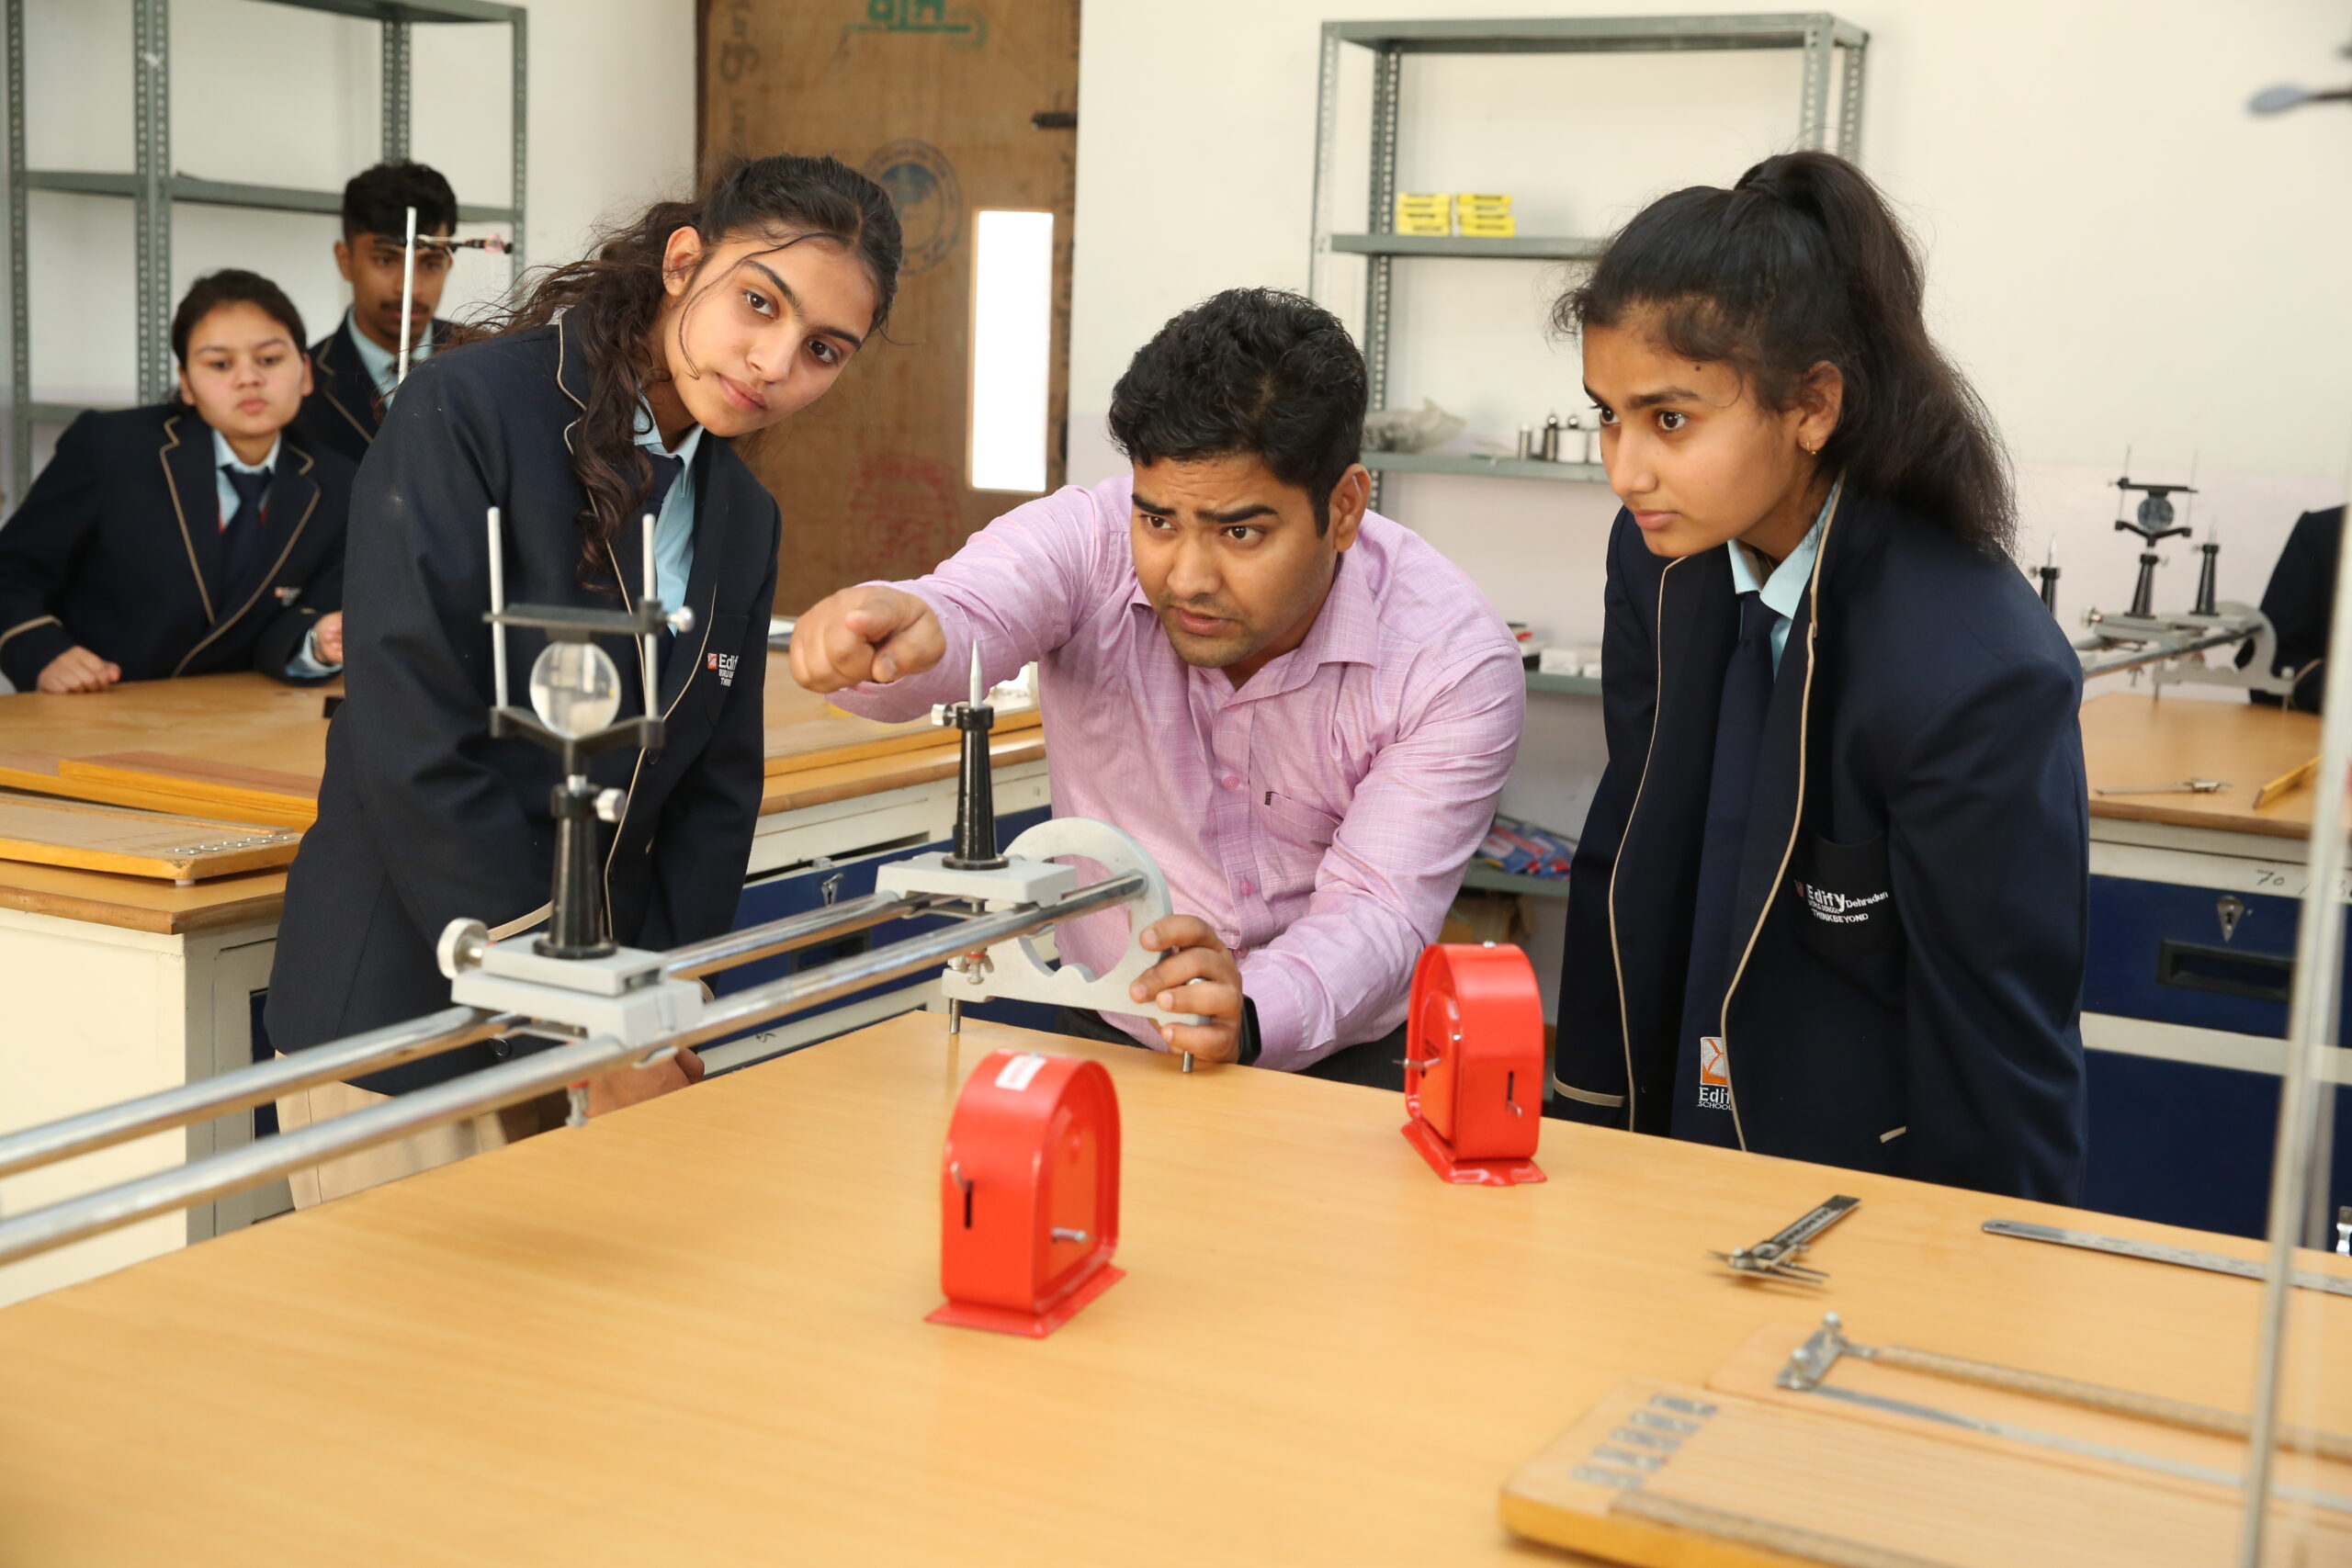 what is the importance of science education in schools